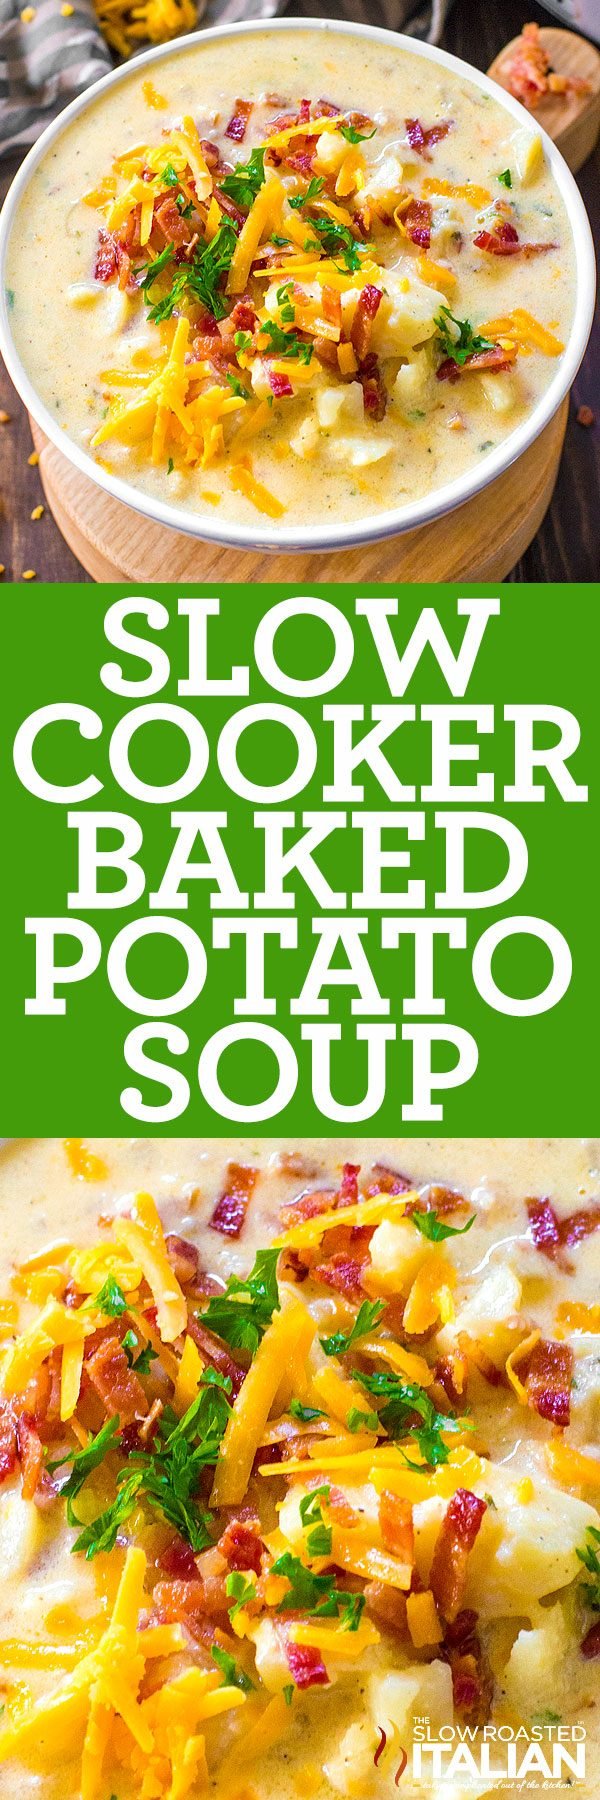 titled image (and shown): Slow Cooker Baked Potato Soup